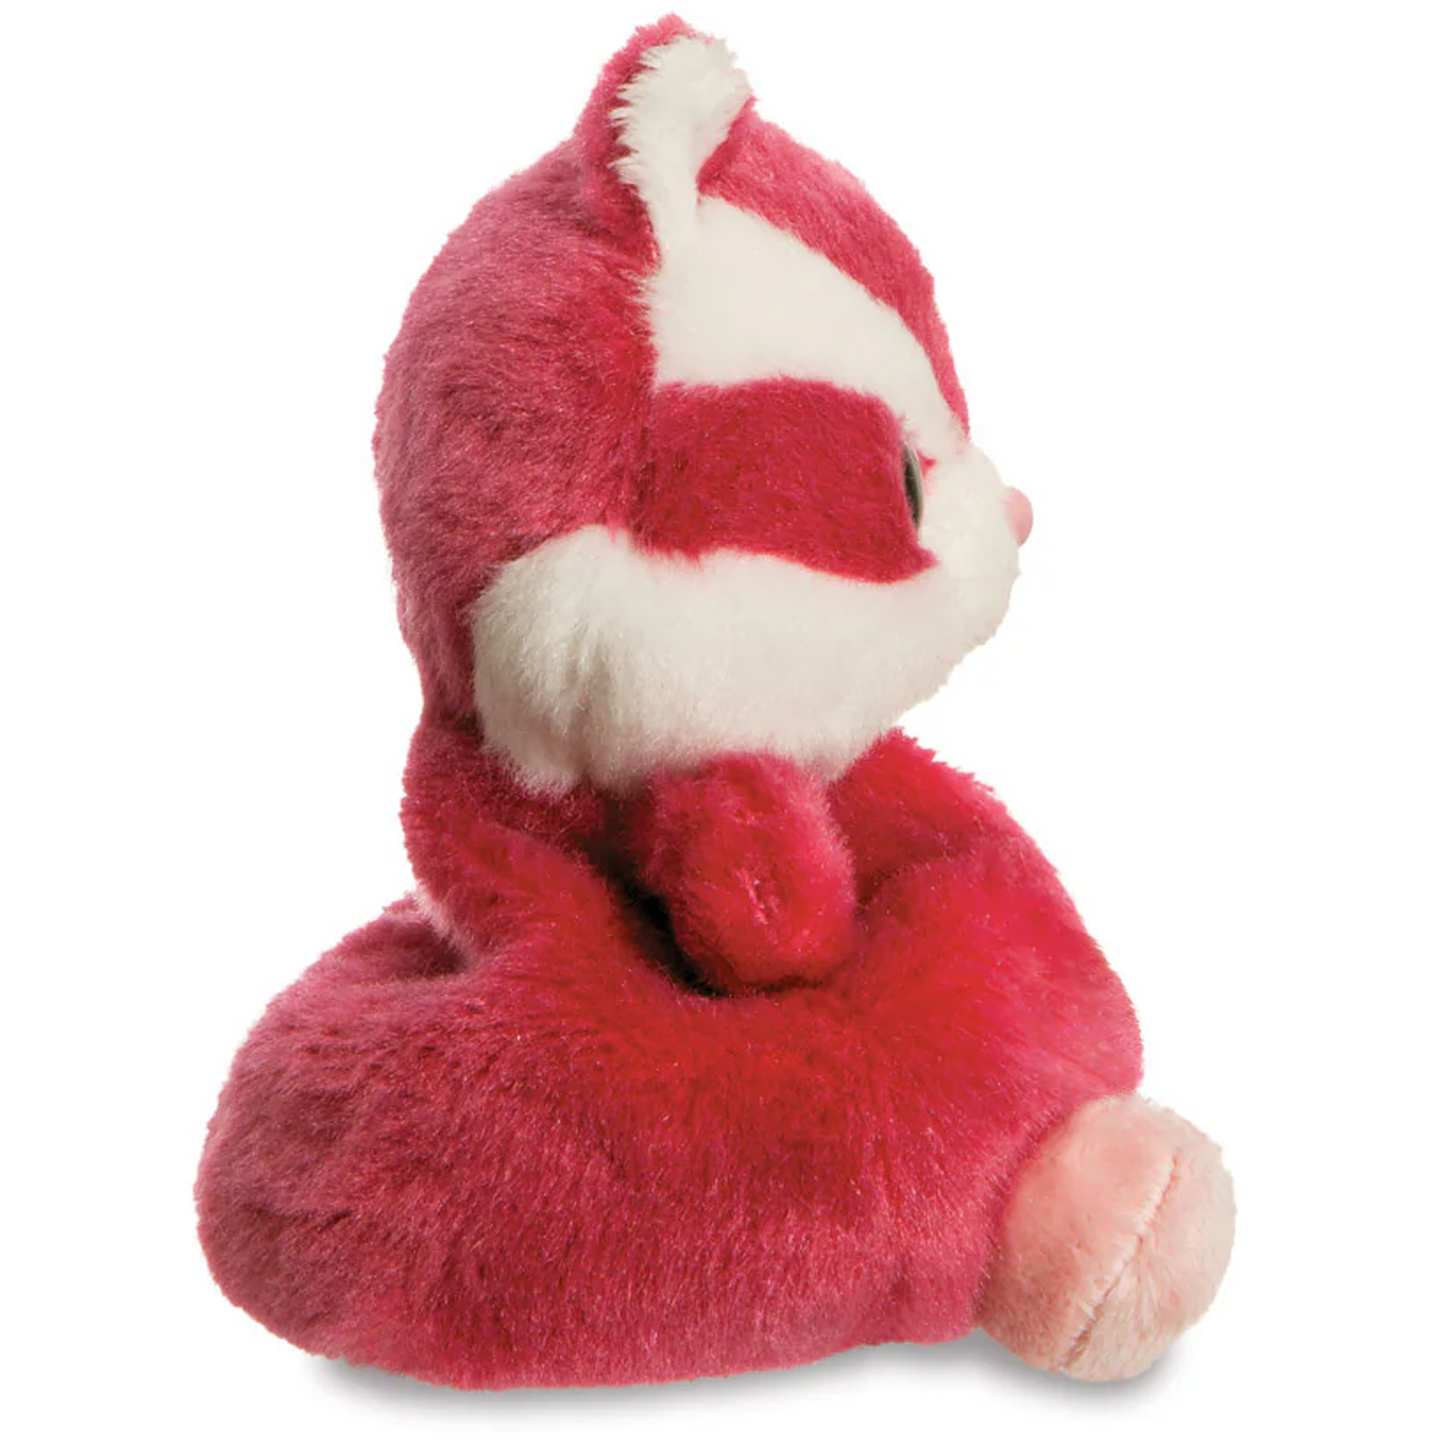 Chewoo the Red Squirrel - Palm Pal Plushie Stuffed Animal Soft Toy (Side) | Happy Piranha